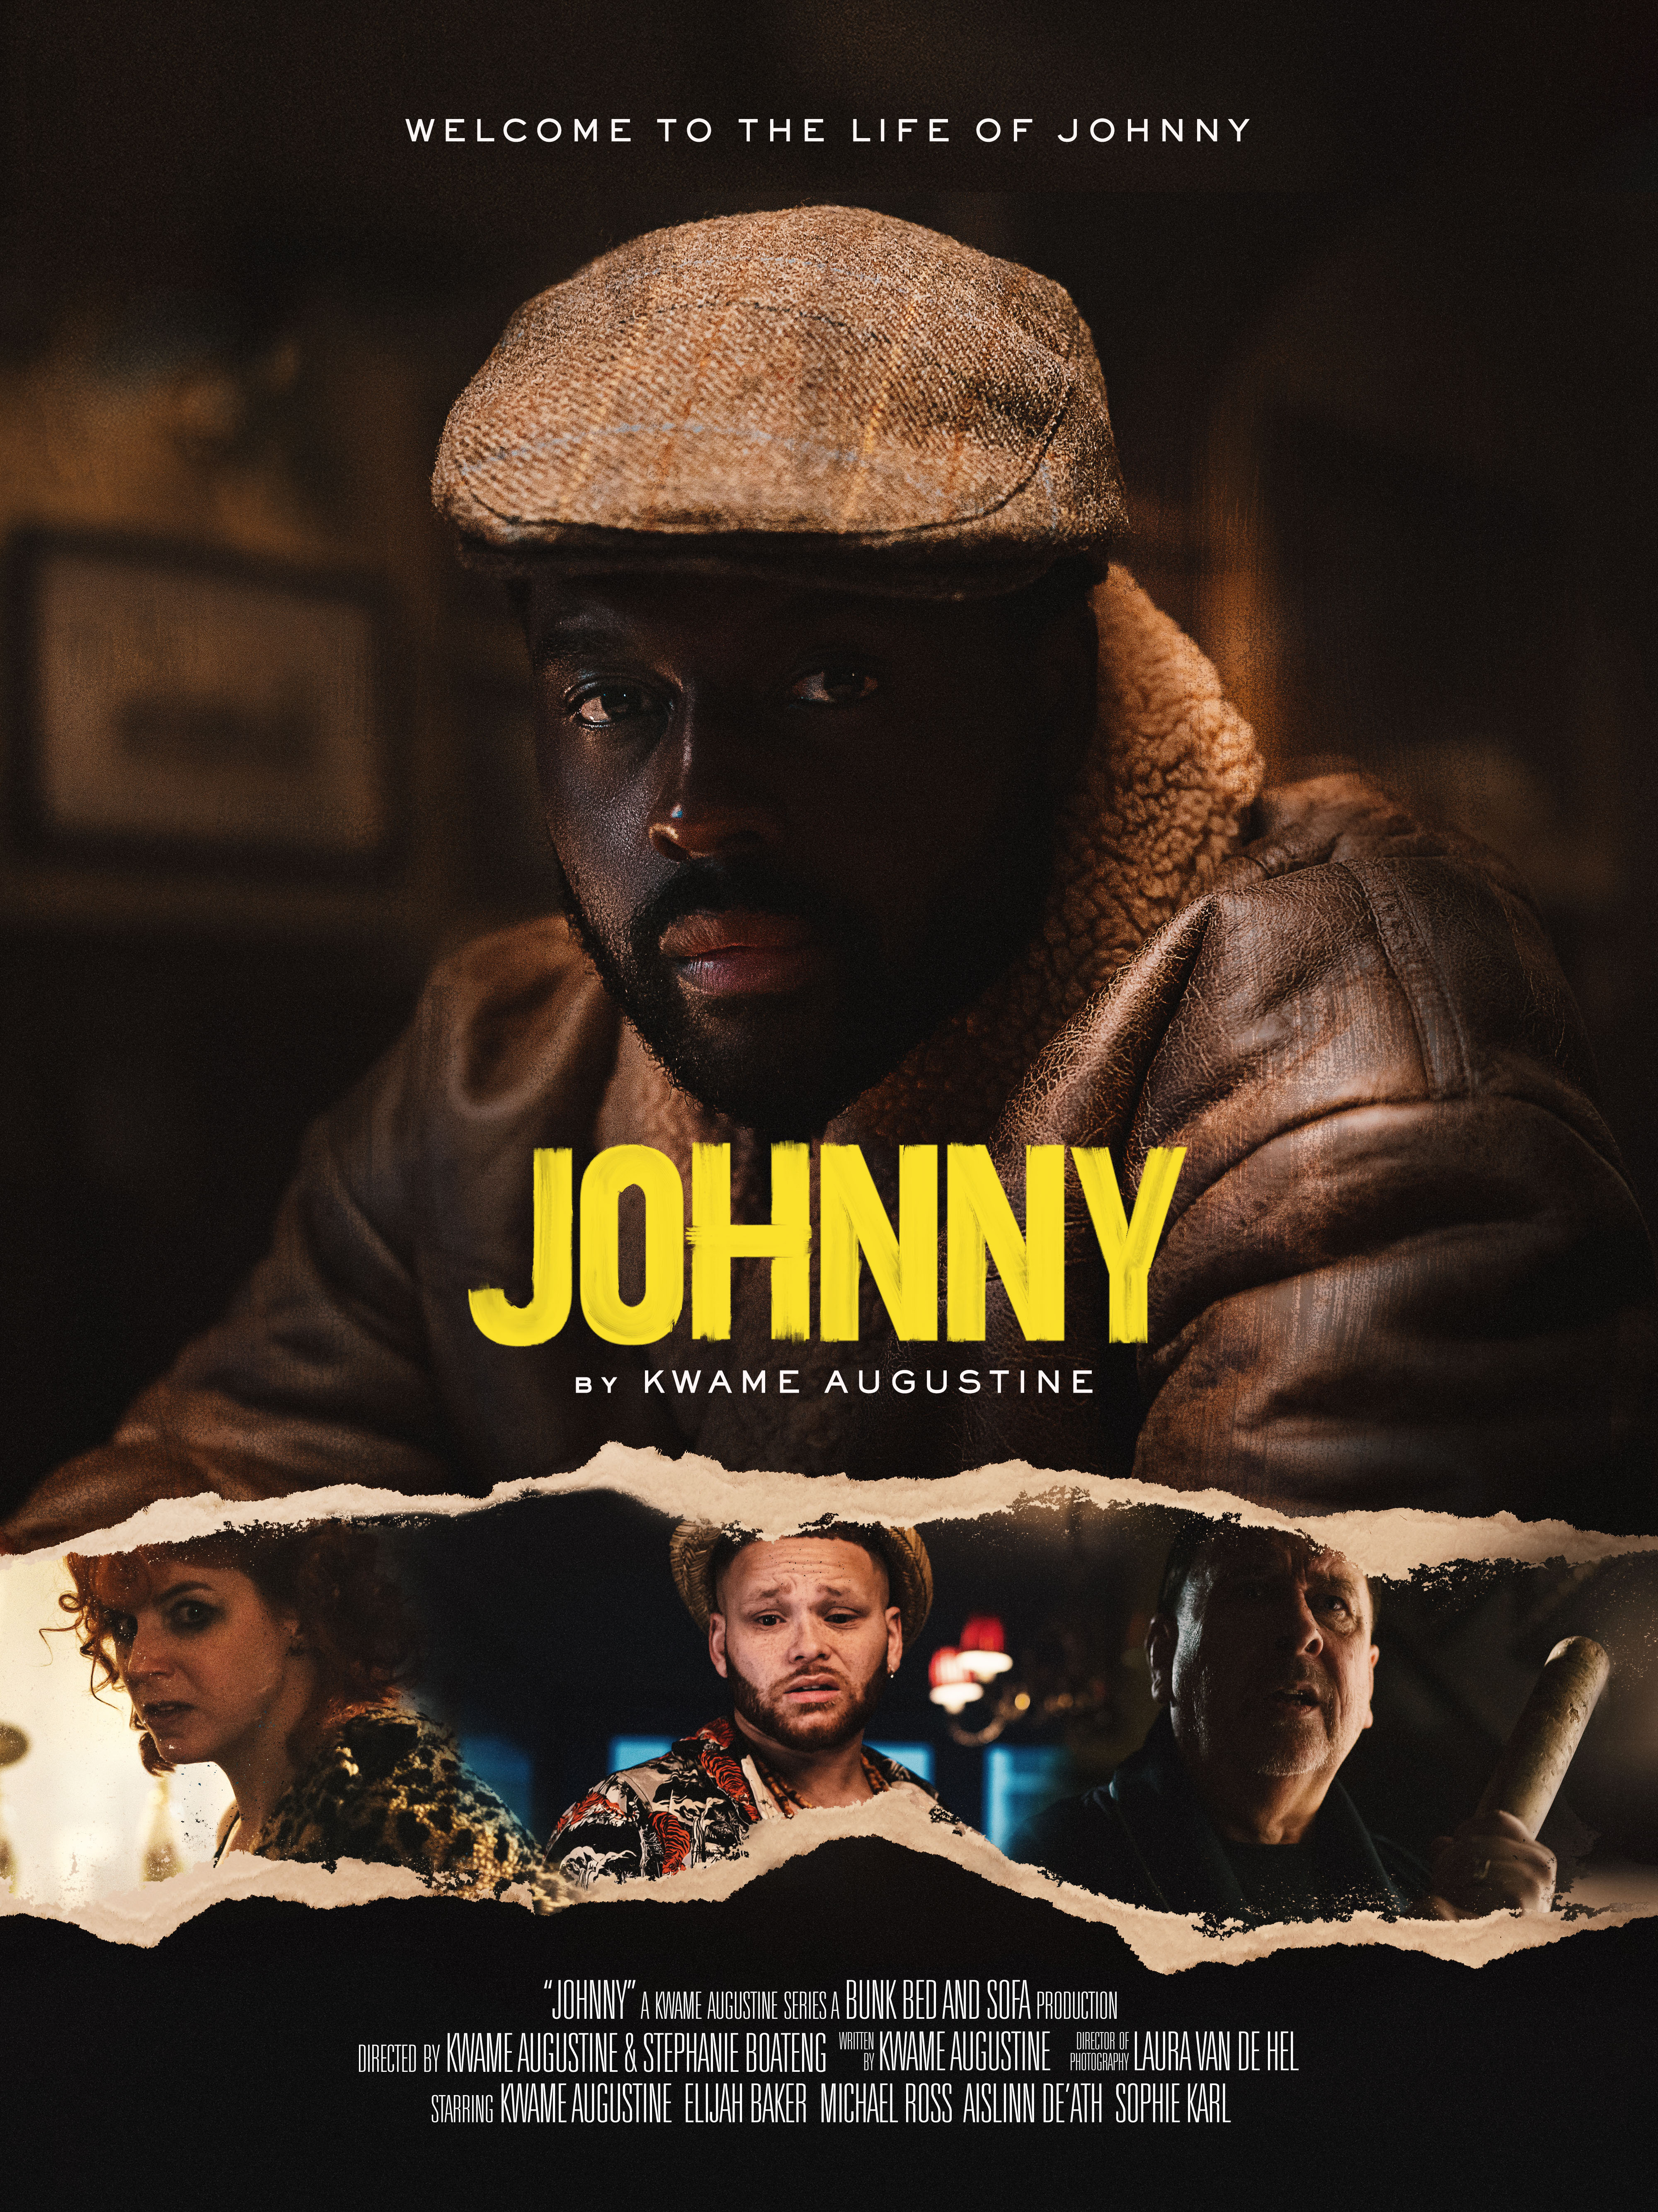 New series Johnny is the ultimate British comedy drama